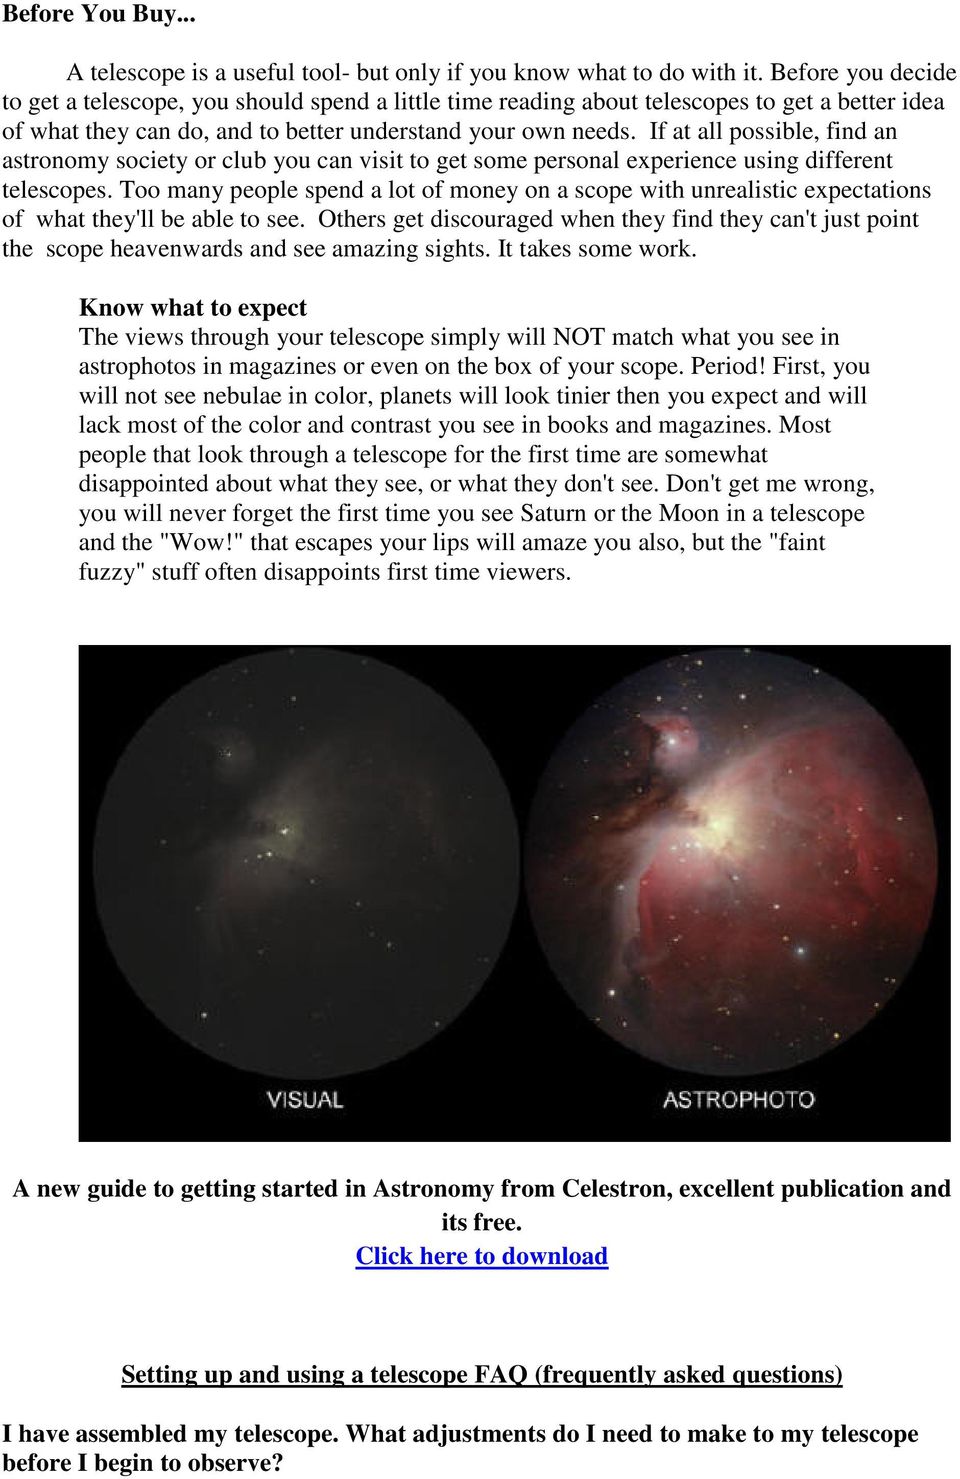 If at all possible, find an astronomy society or club you can visit to get some personal experience using different telescopes.